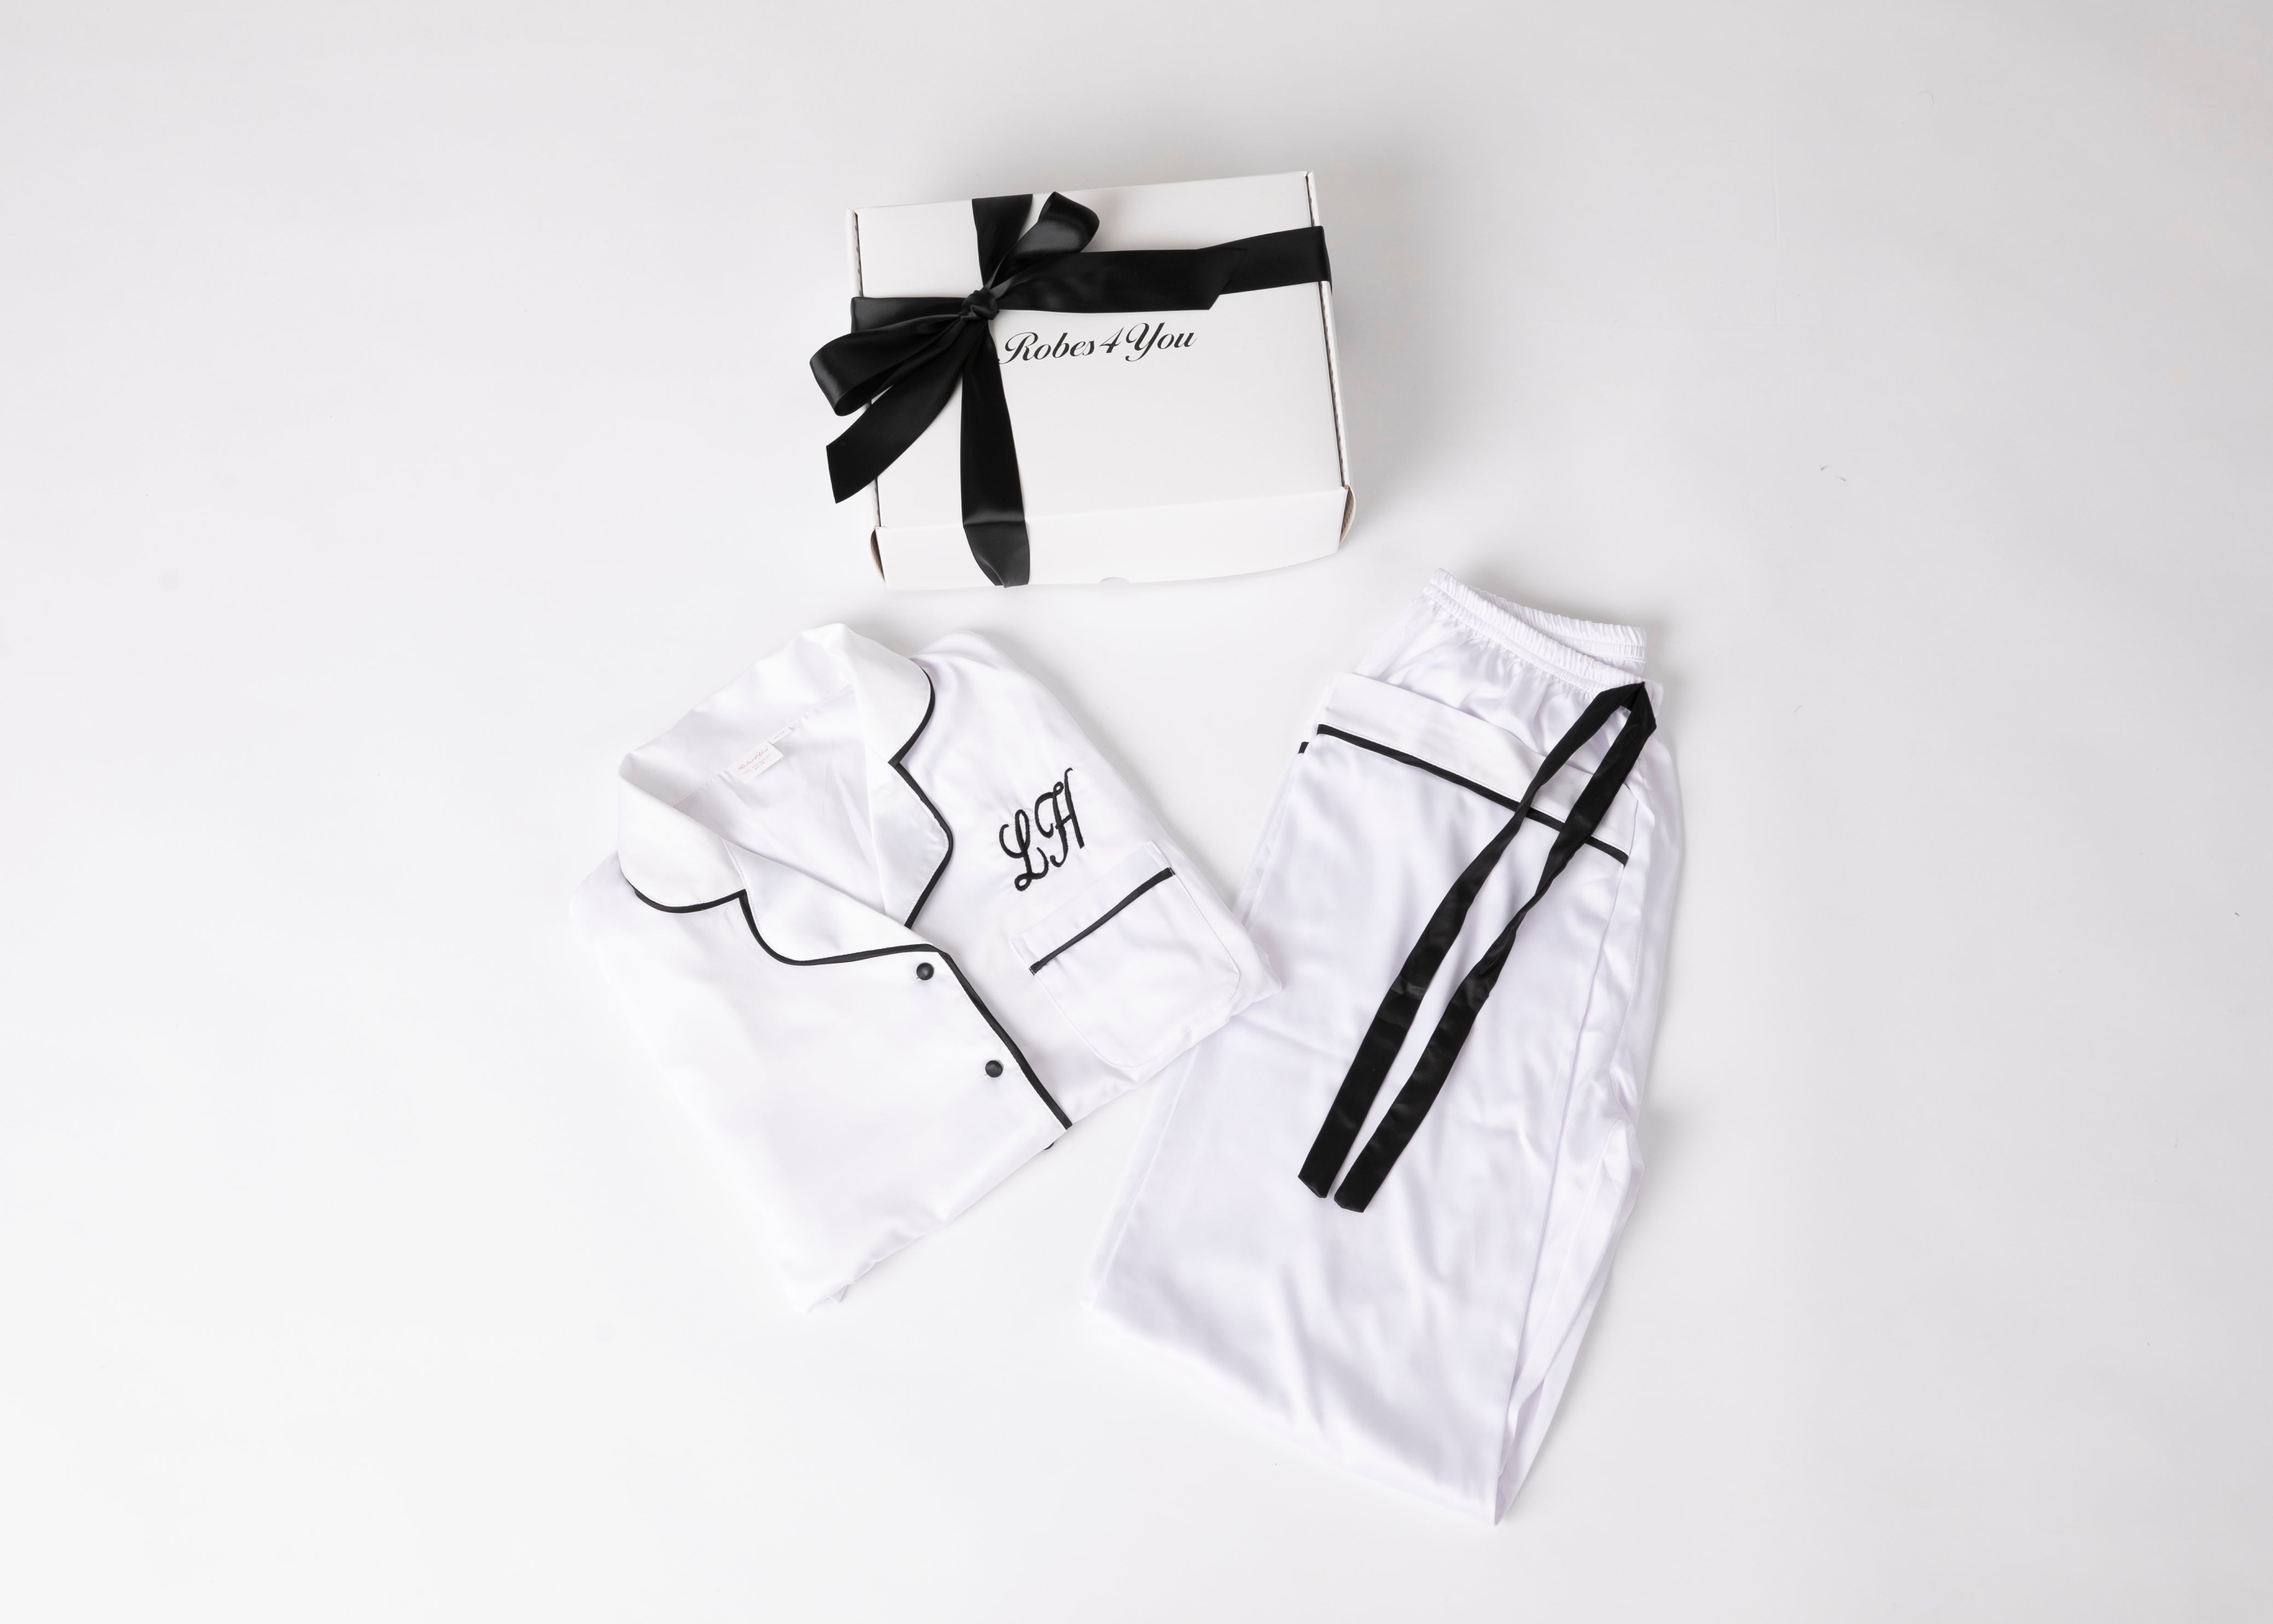 Personalised White Satin Pjs with Black Piping in a gift box with box